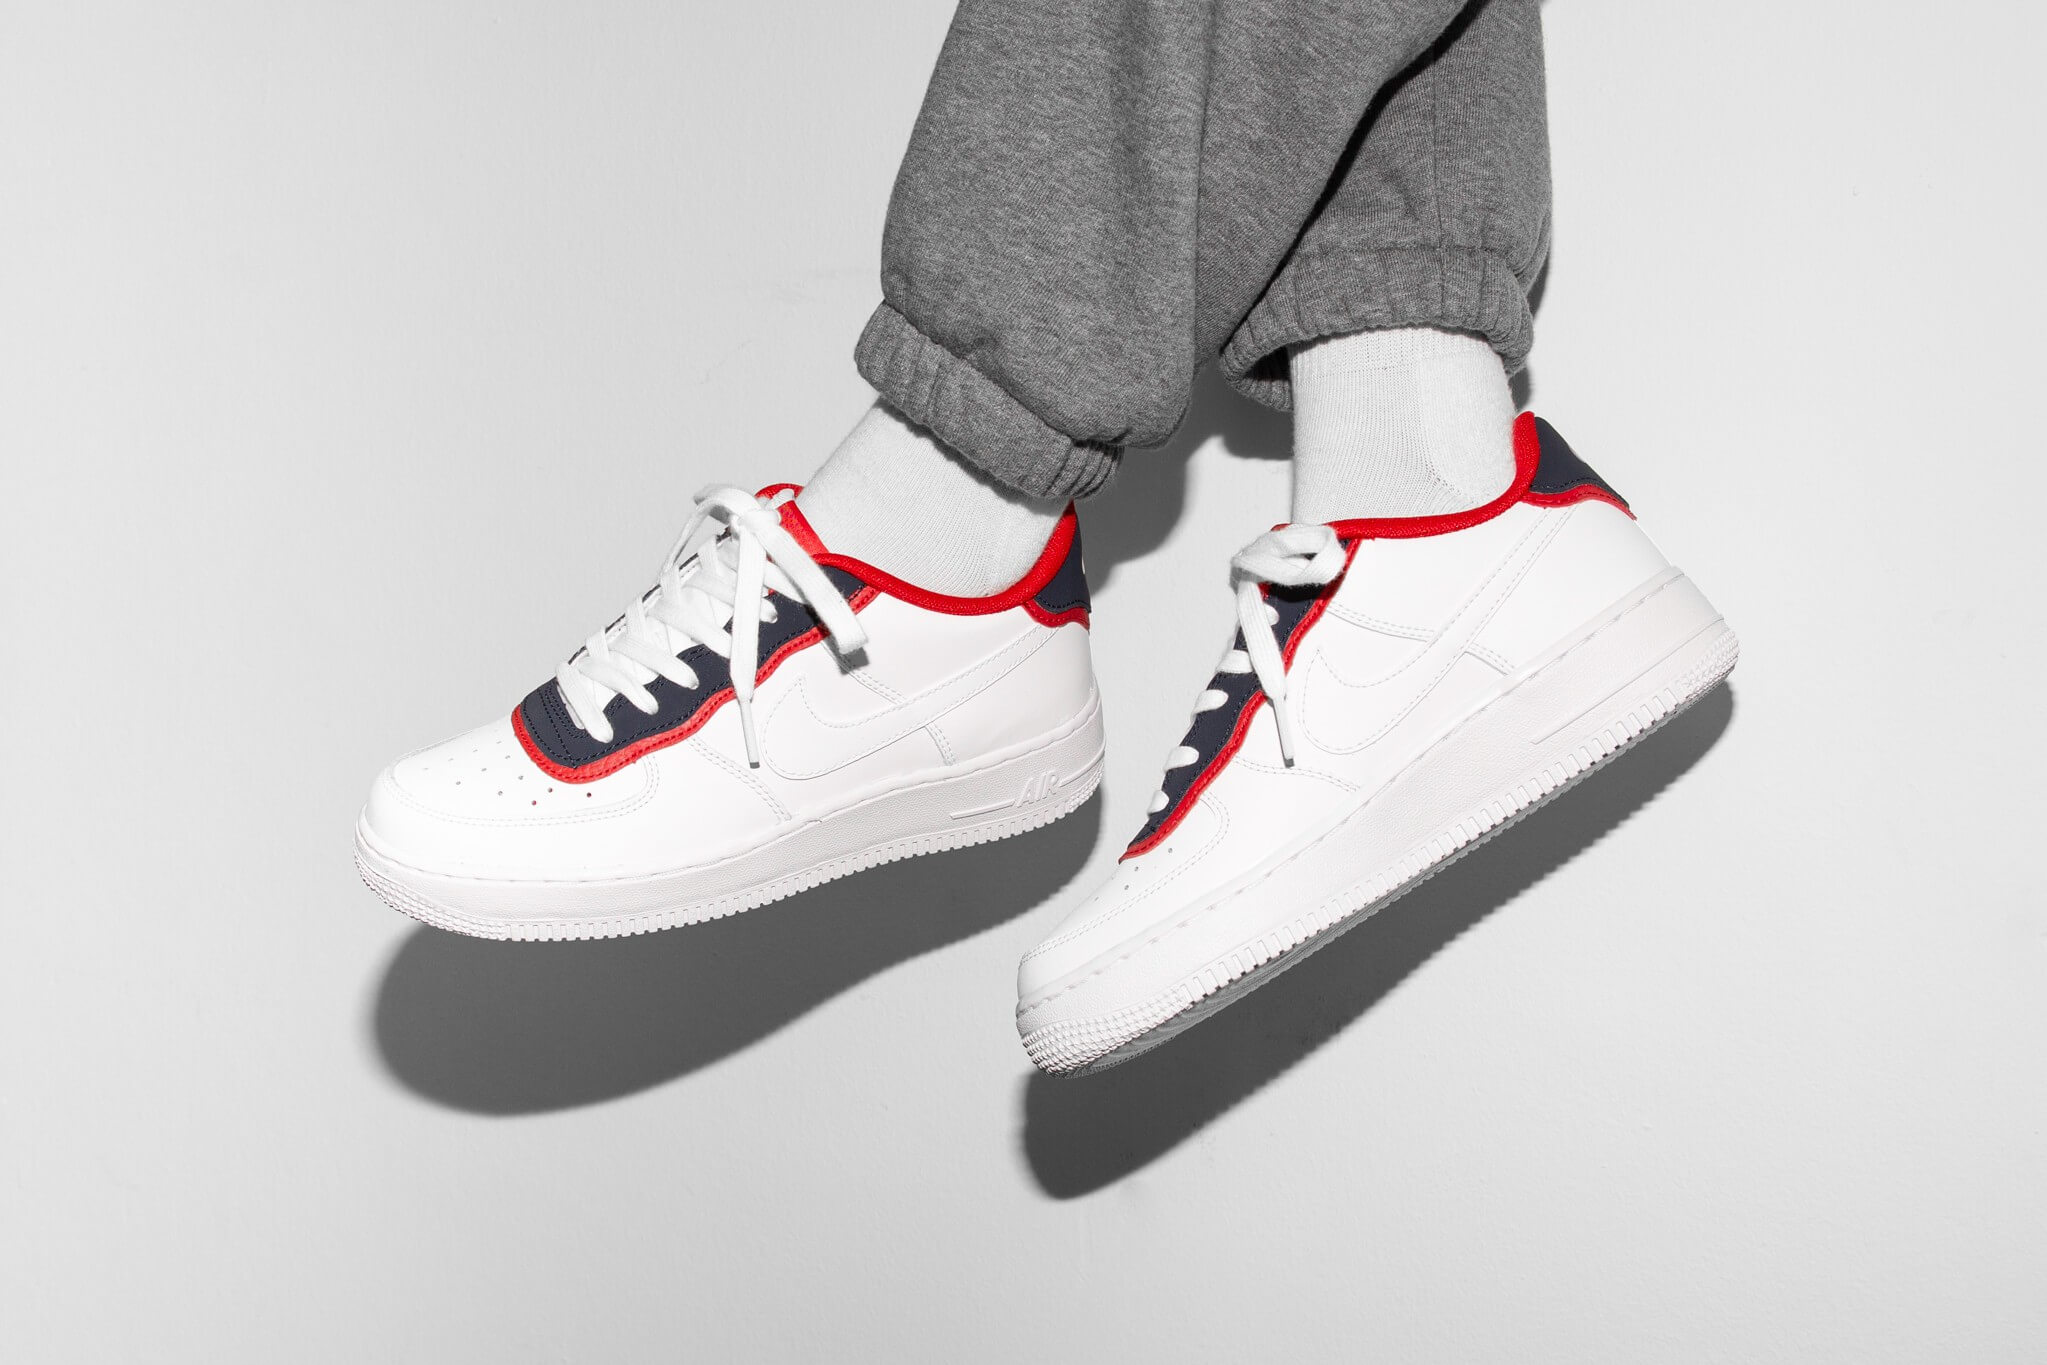 Nike Air Force 1 '07 LV8 Double Layer - Obsidian Red 2019 Size 10